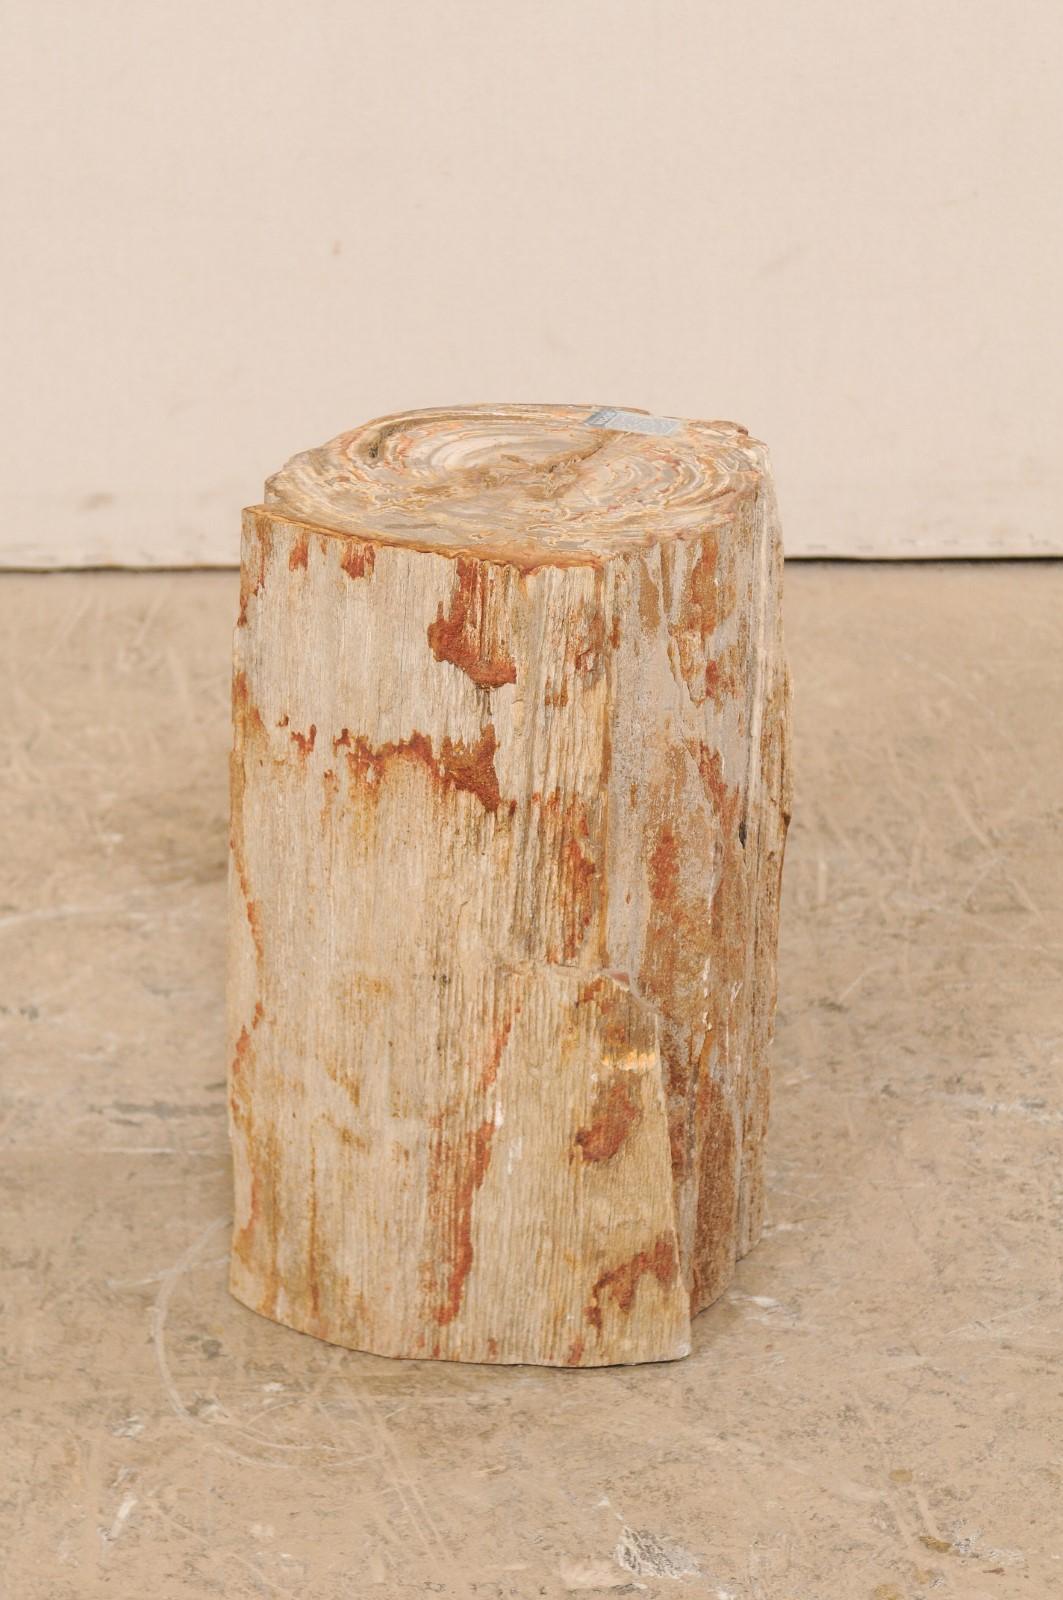 Live-Edge Petrified Wood Stool or Small Drinks Table In Good Condition For Sale In Atlanta, GA